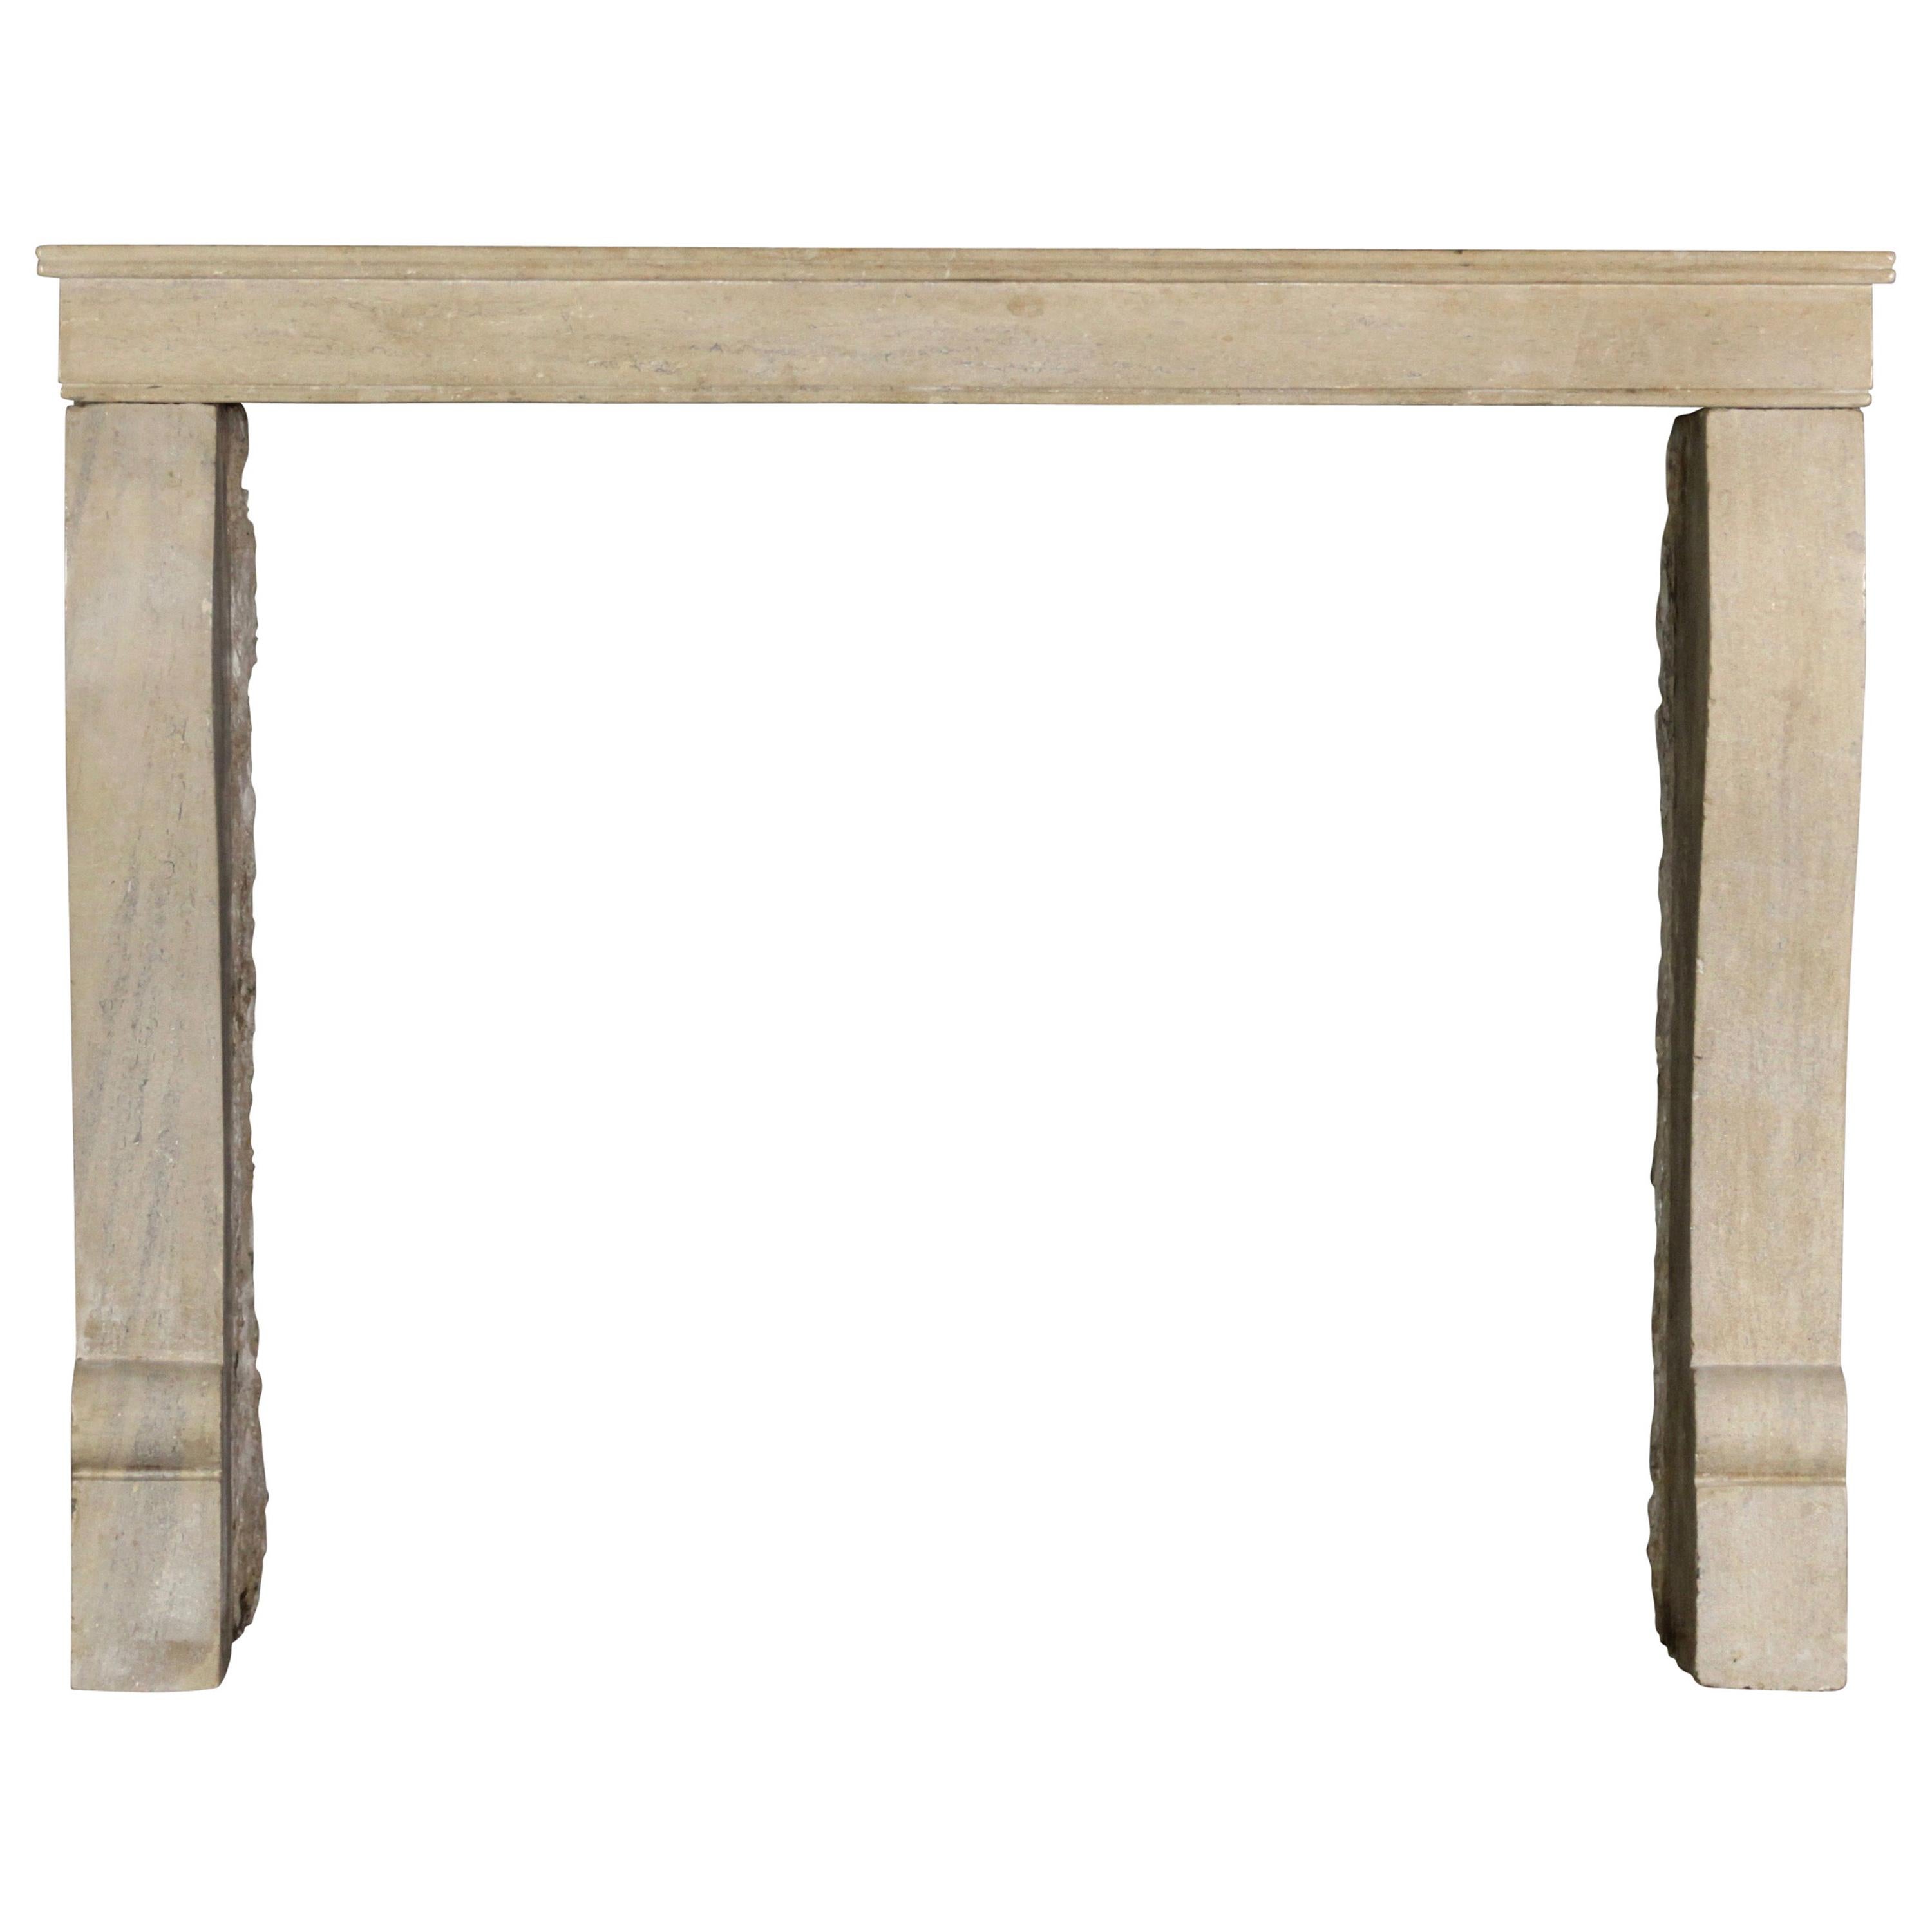 Small French Limestone Antique Fireplace Surround for Eclectic Chic Interior For Sale